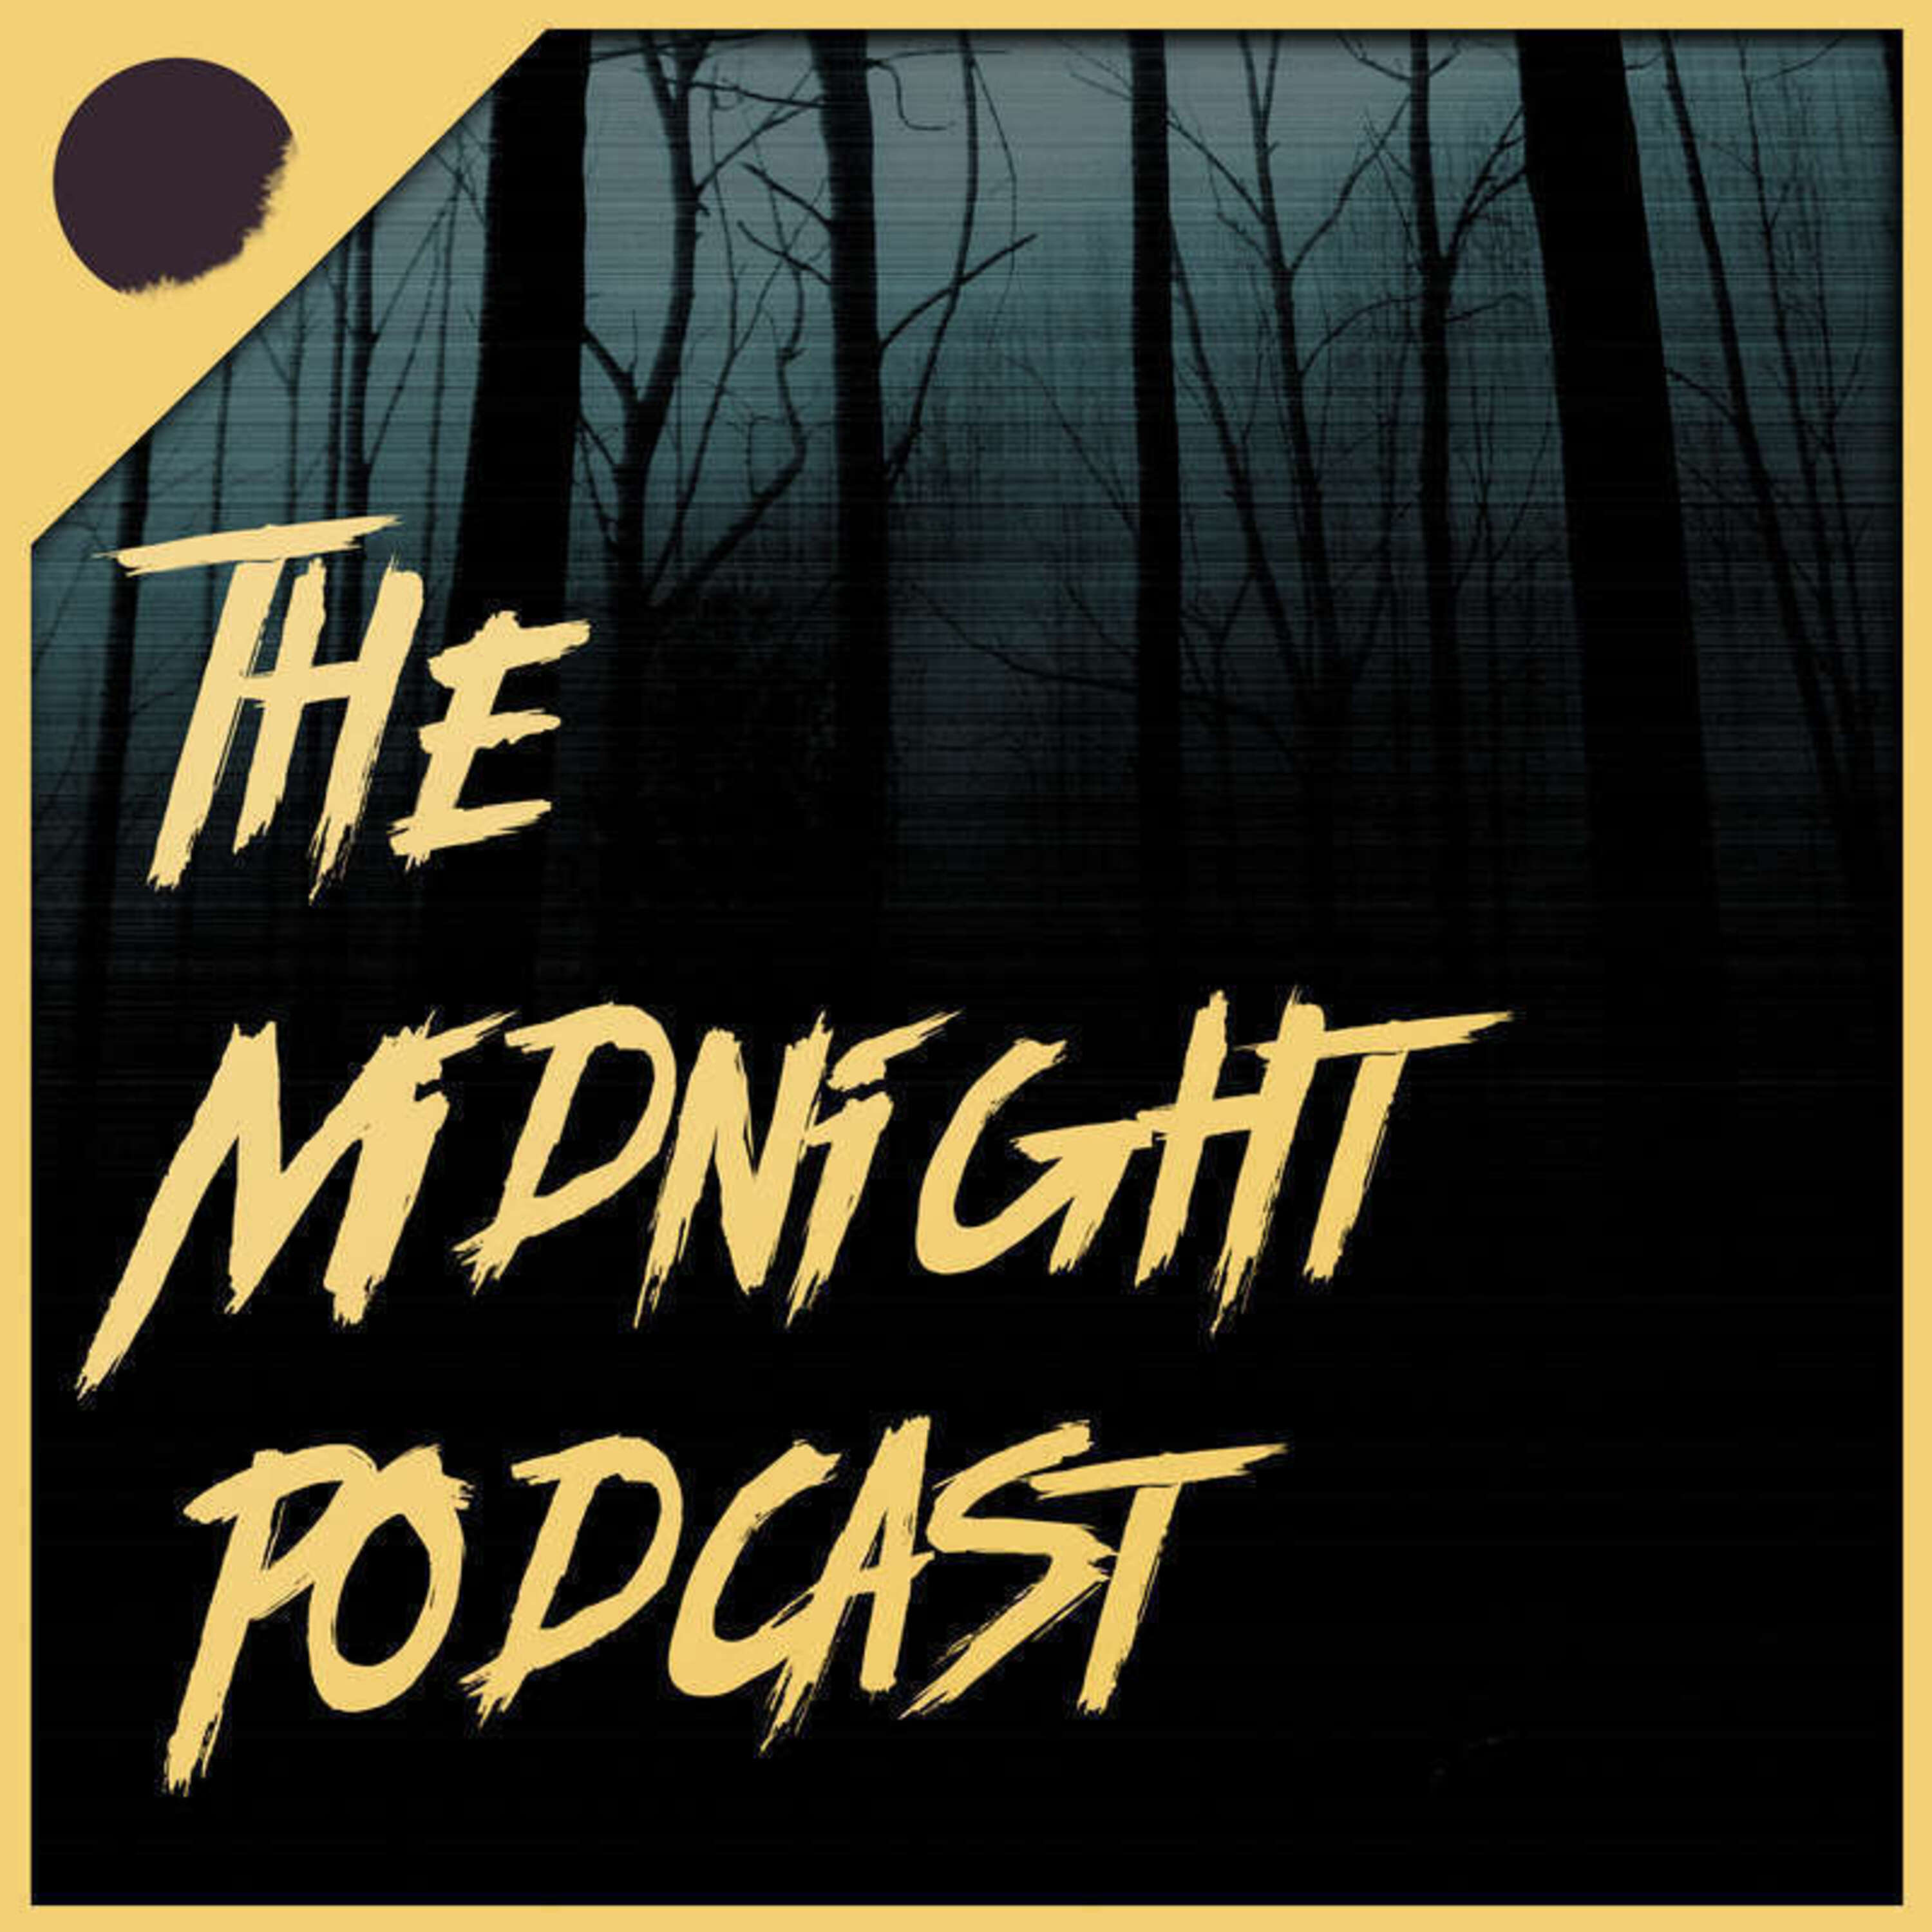 Episode 123 | There's a strange newspaper that's only delivered at midnight | Part 9